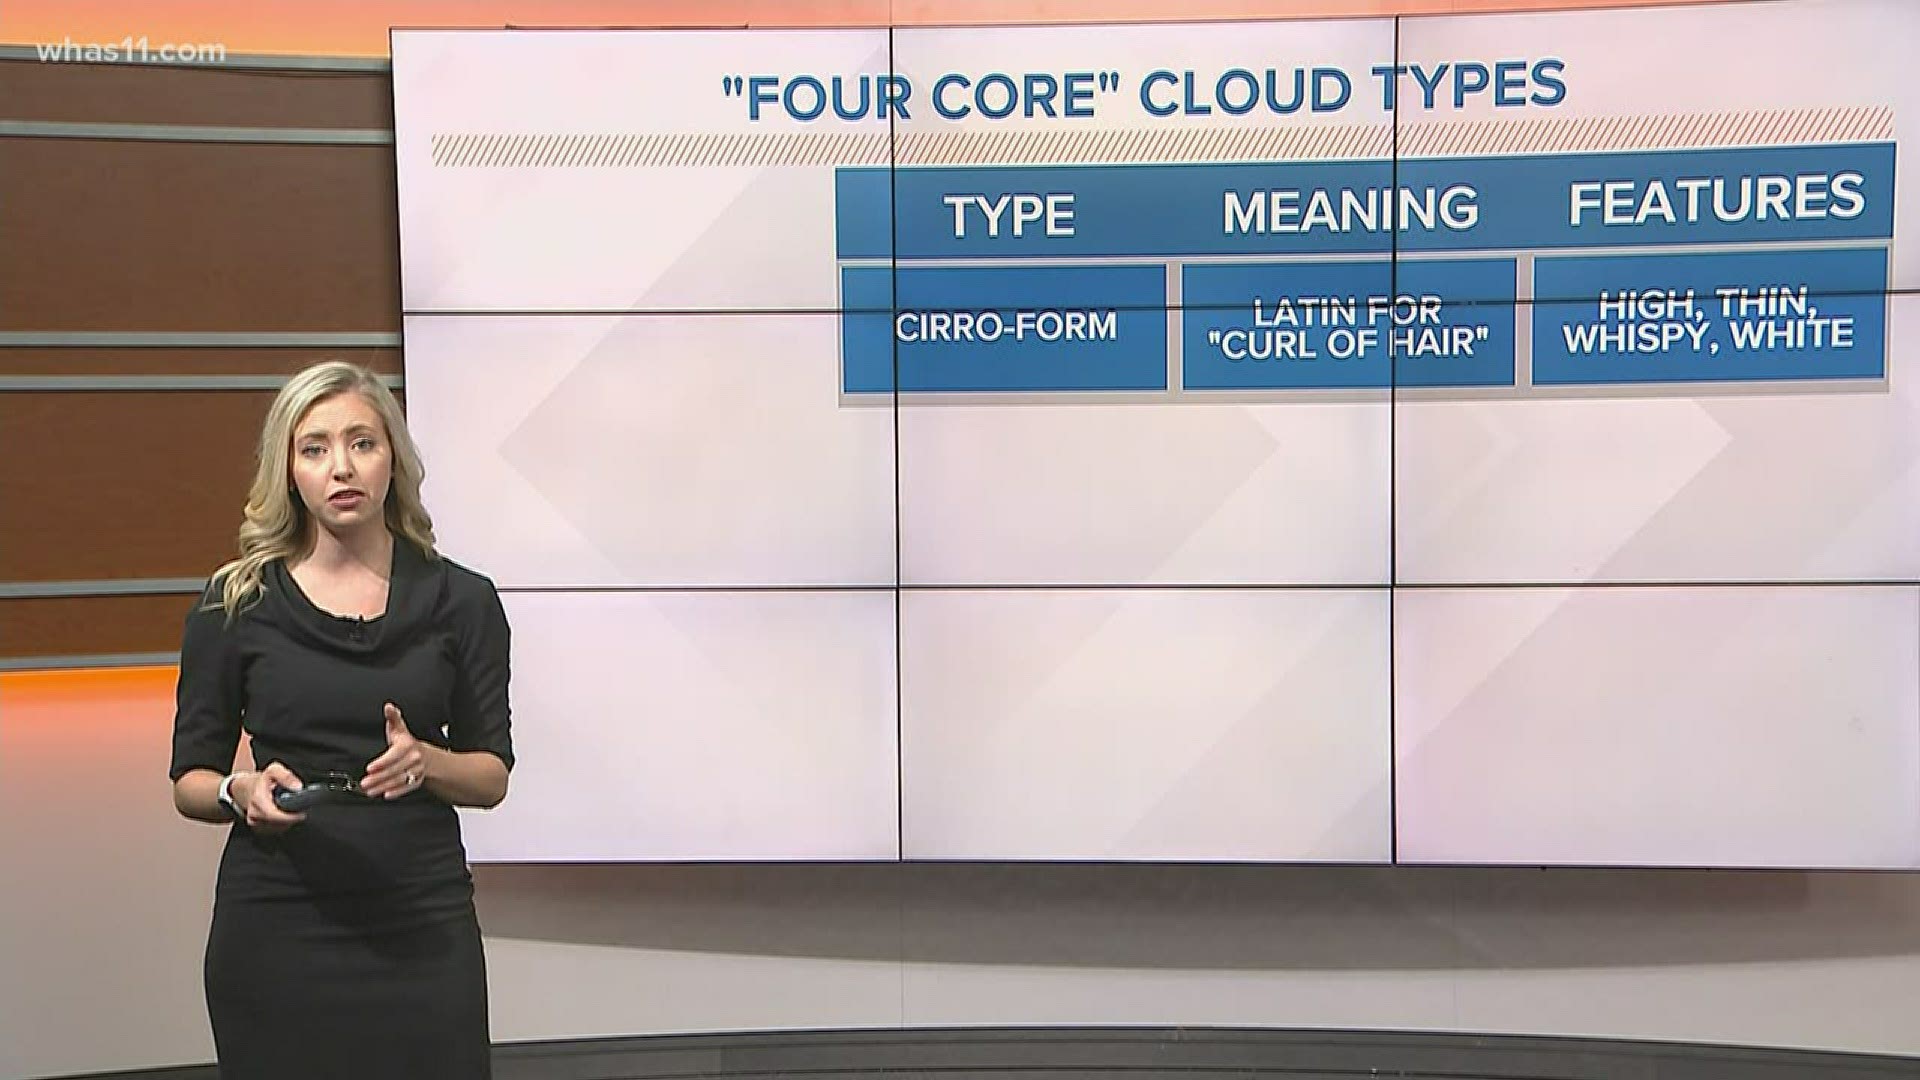 These are your four core cloud types.